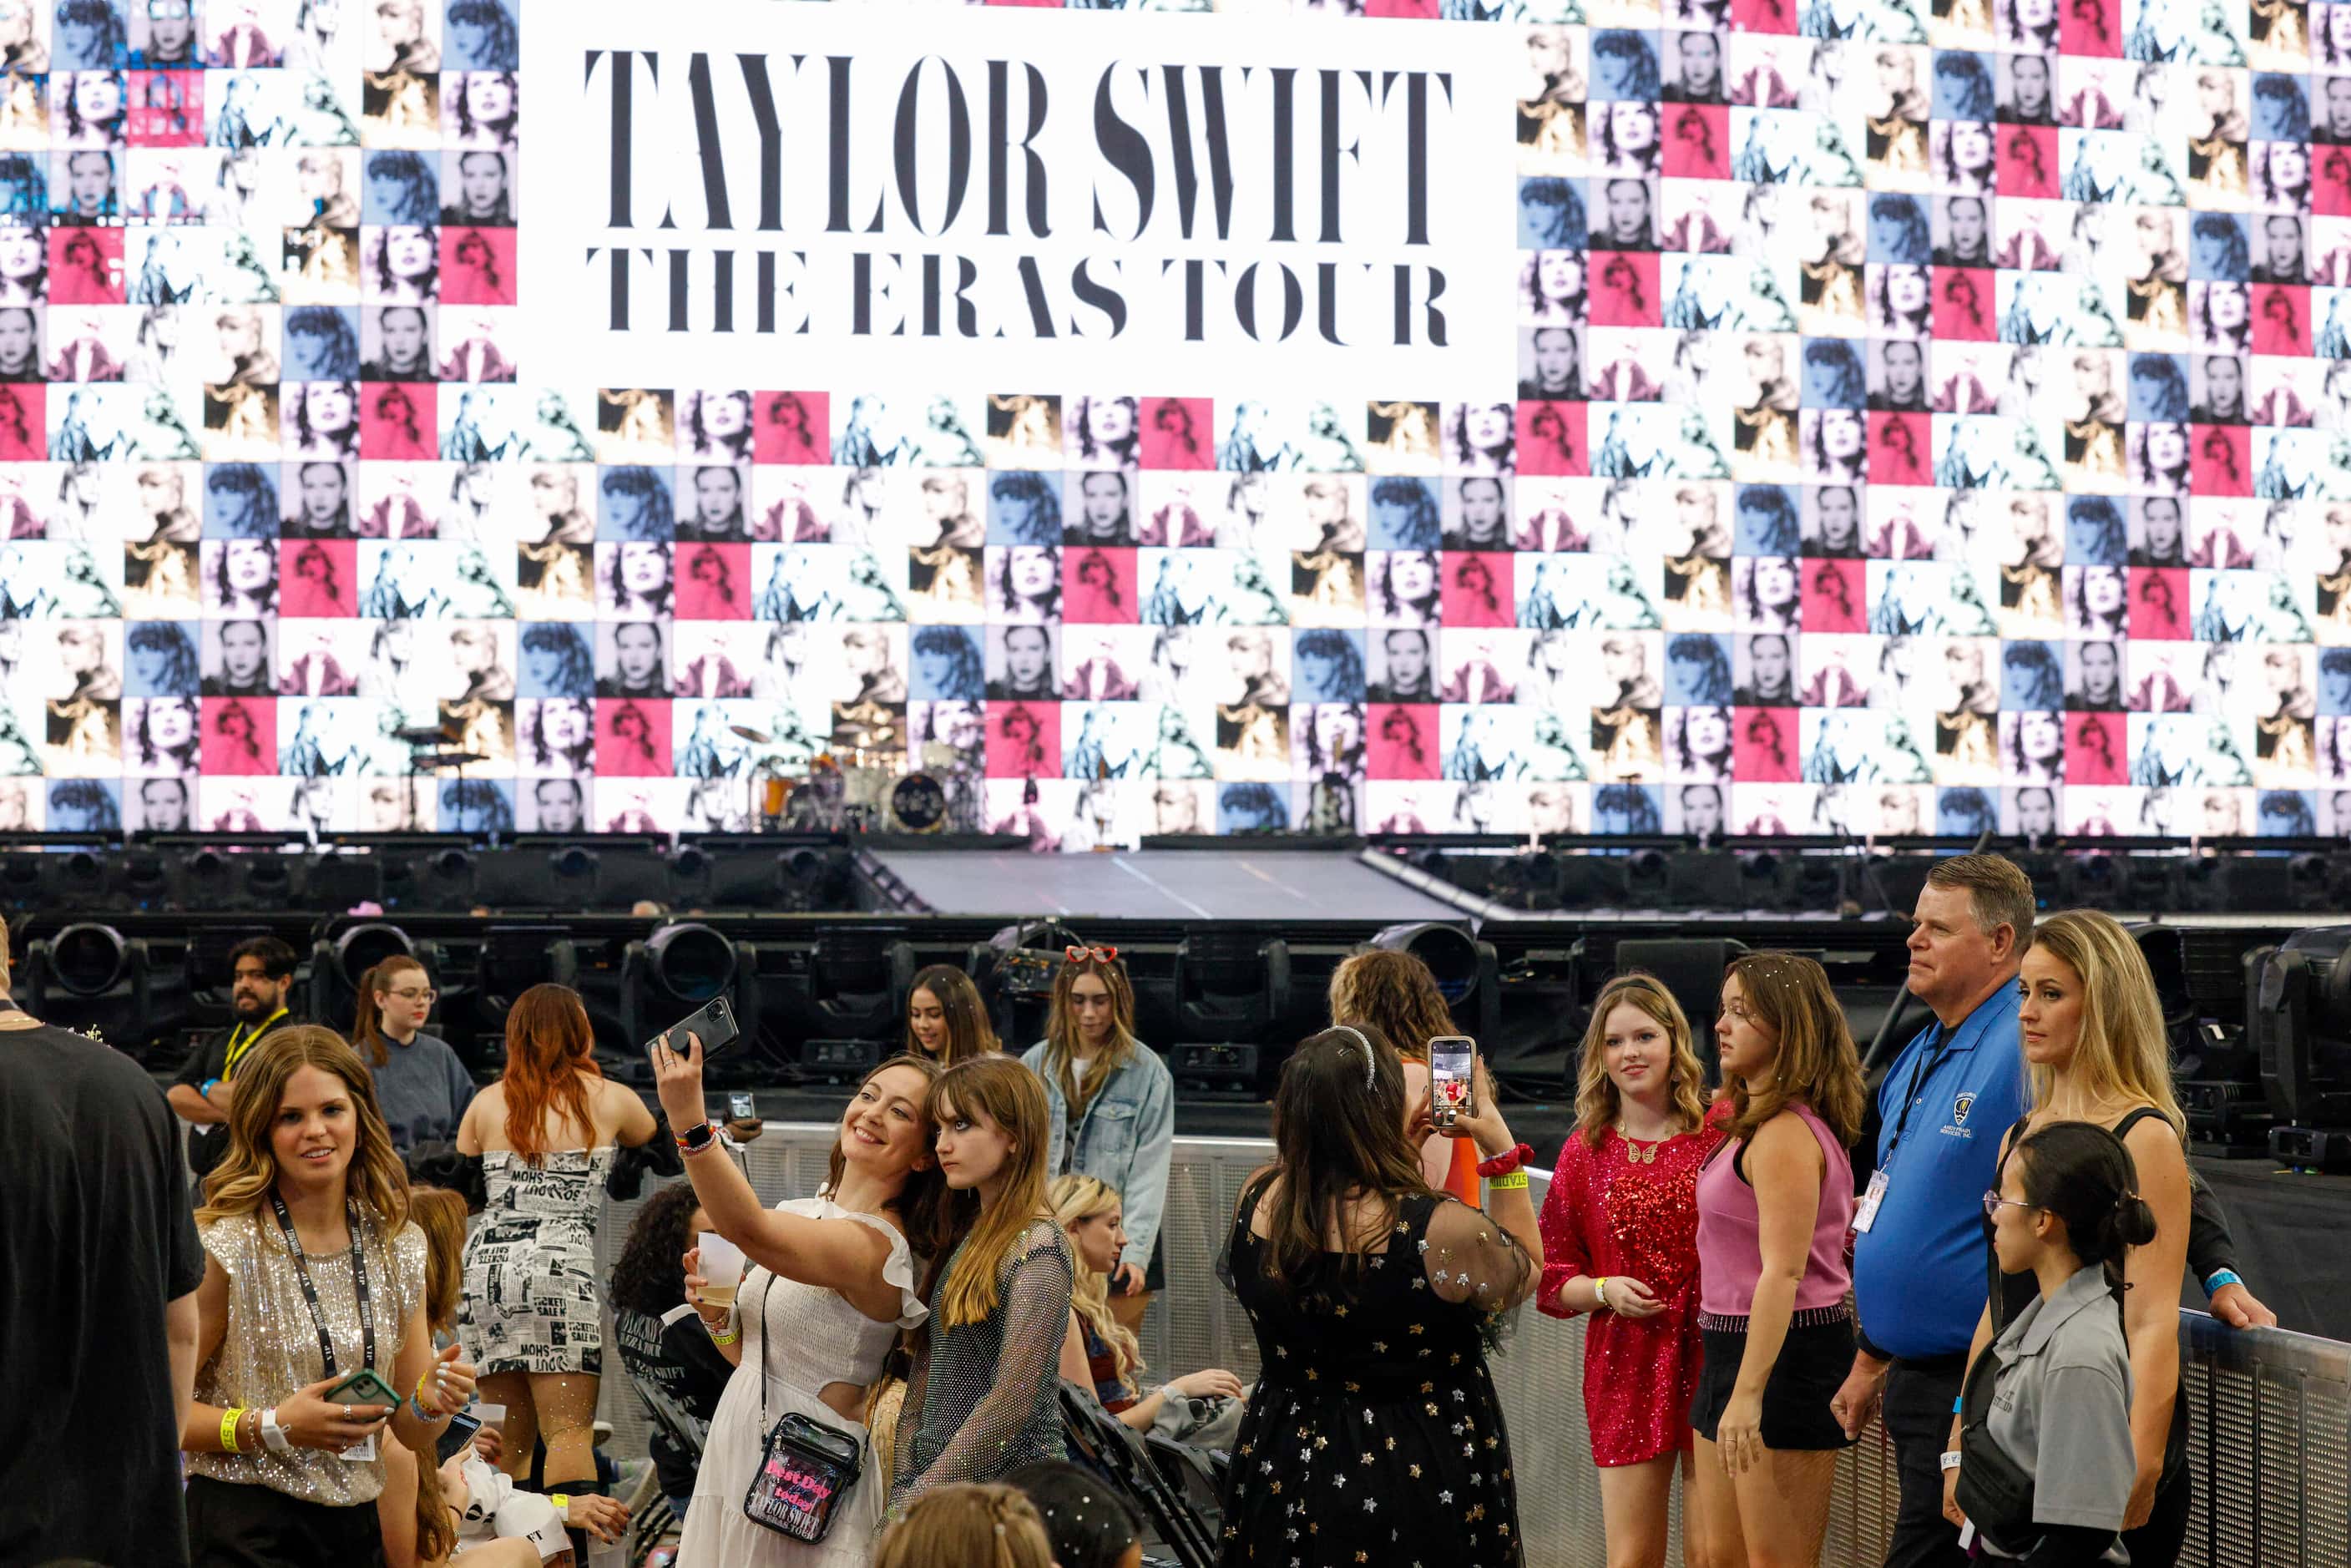 Fans take photos before Taylor Swift performs at the Eras Tour concert at AT&T Stadium on...